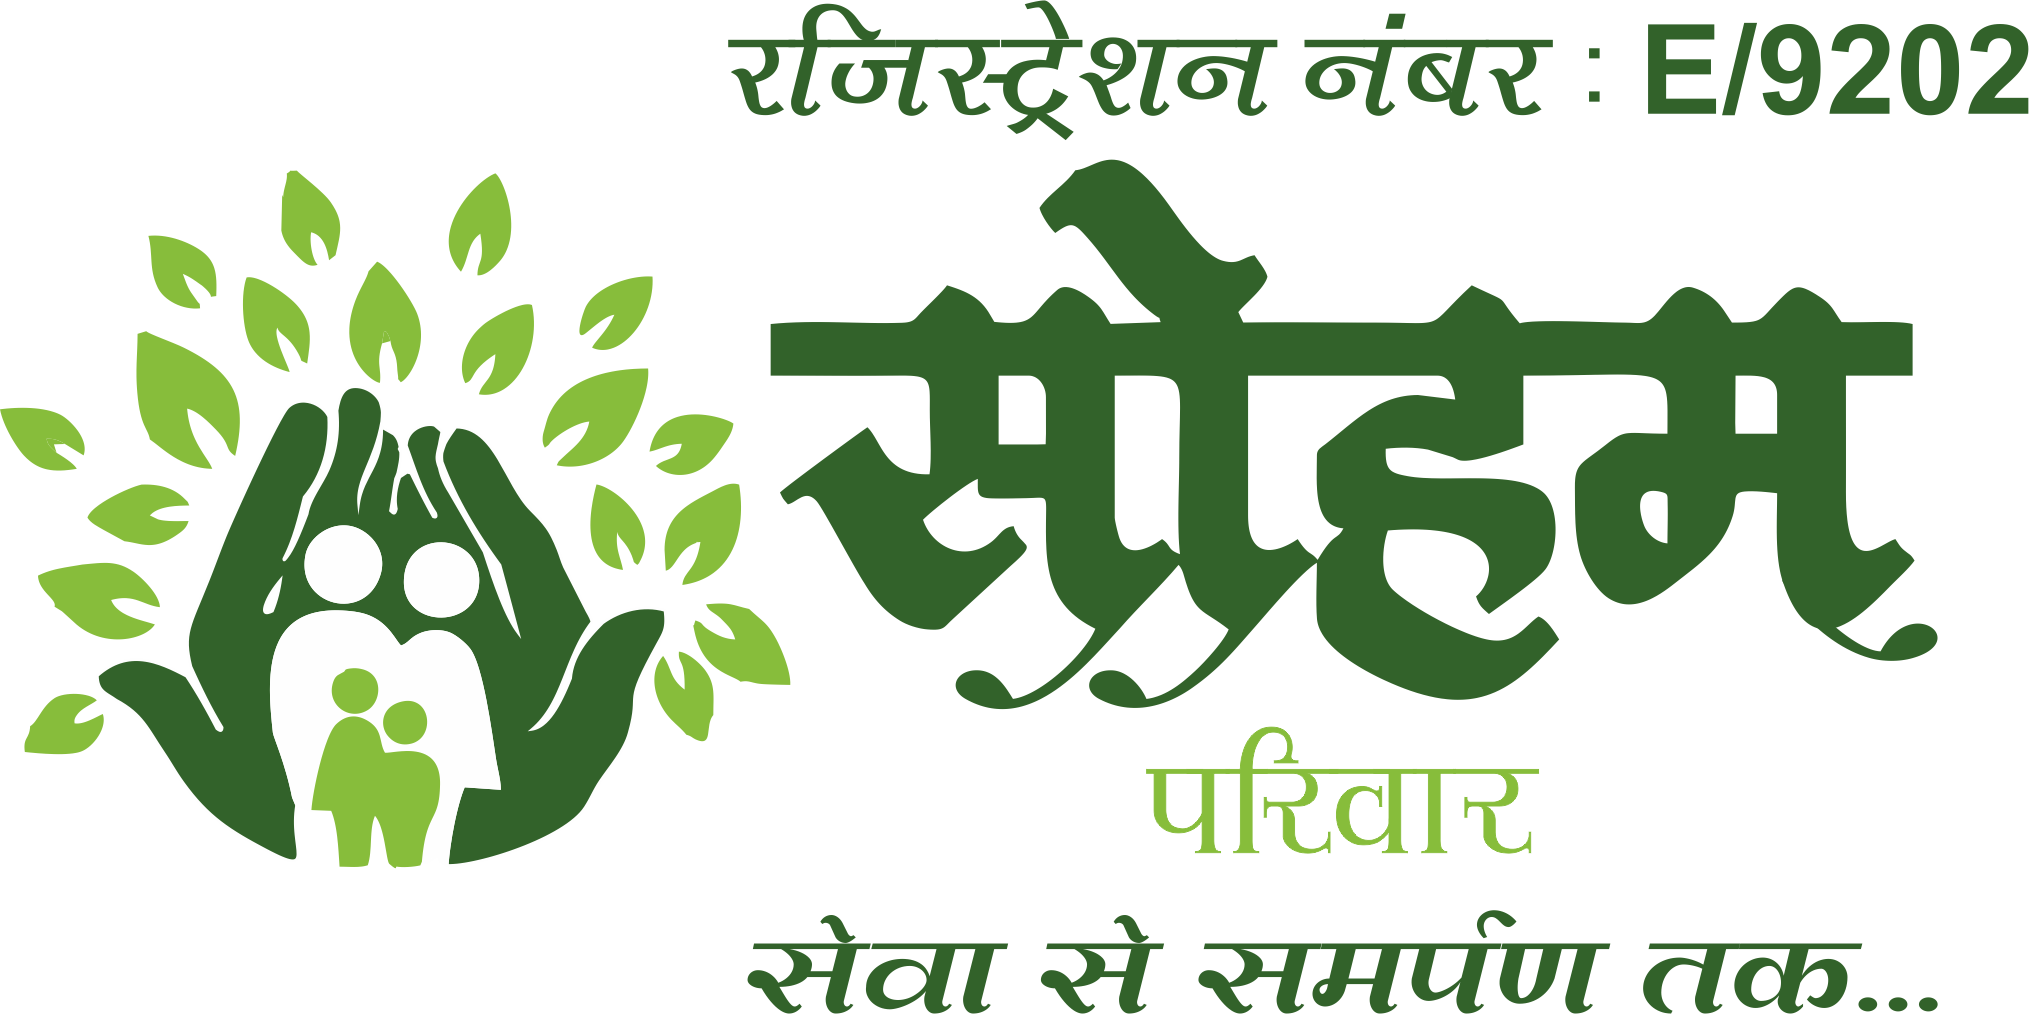 Local Lettering PNG Image, Pariwar Hindi Local Lettering, Local, Lettering,  Hindi Calligraphy PNG Image For Free Download